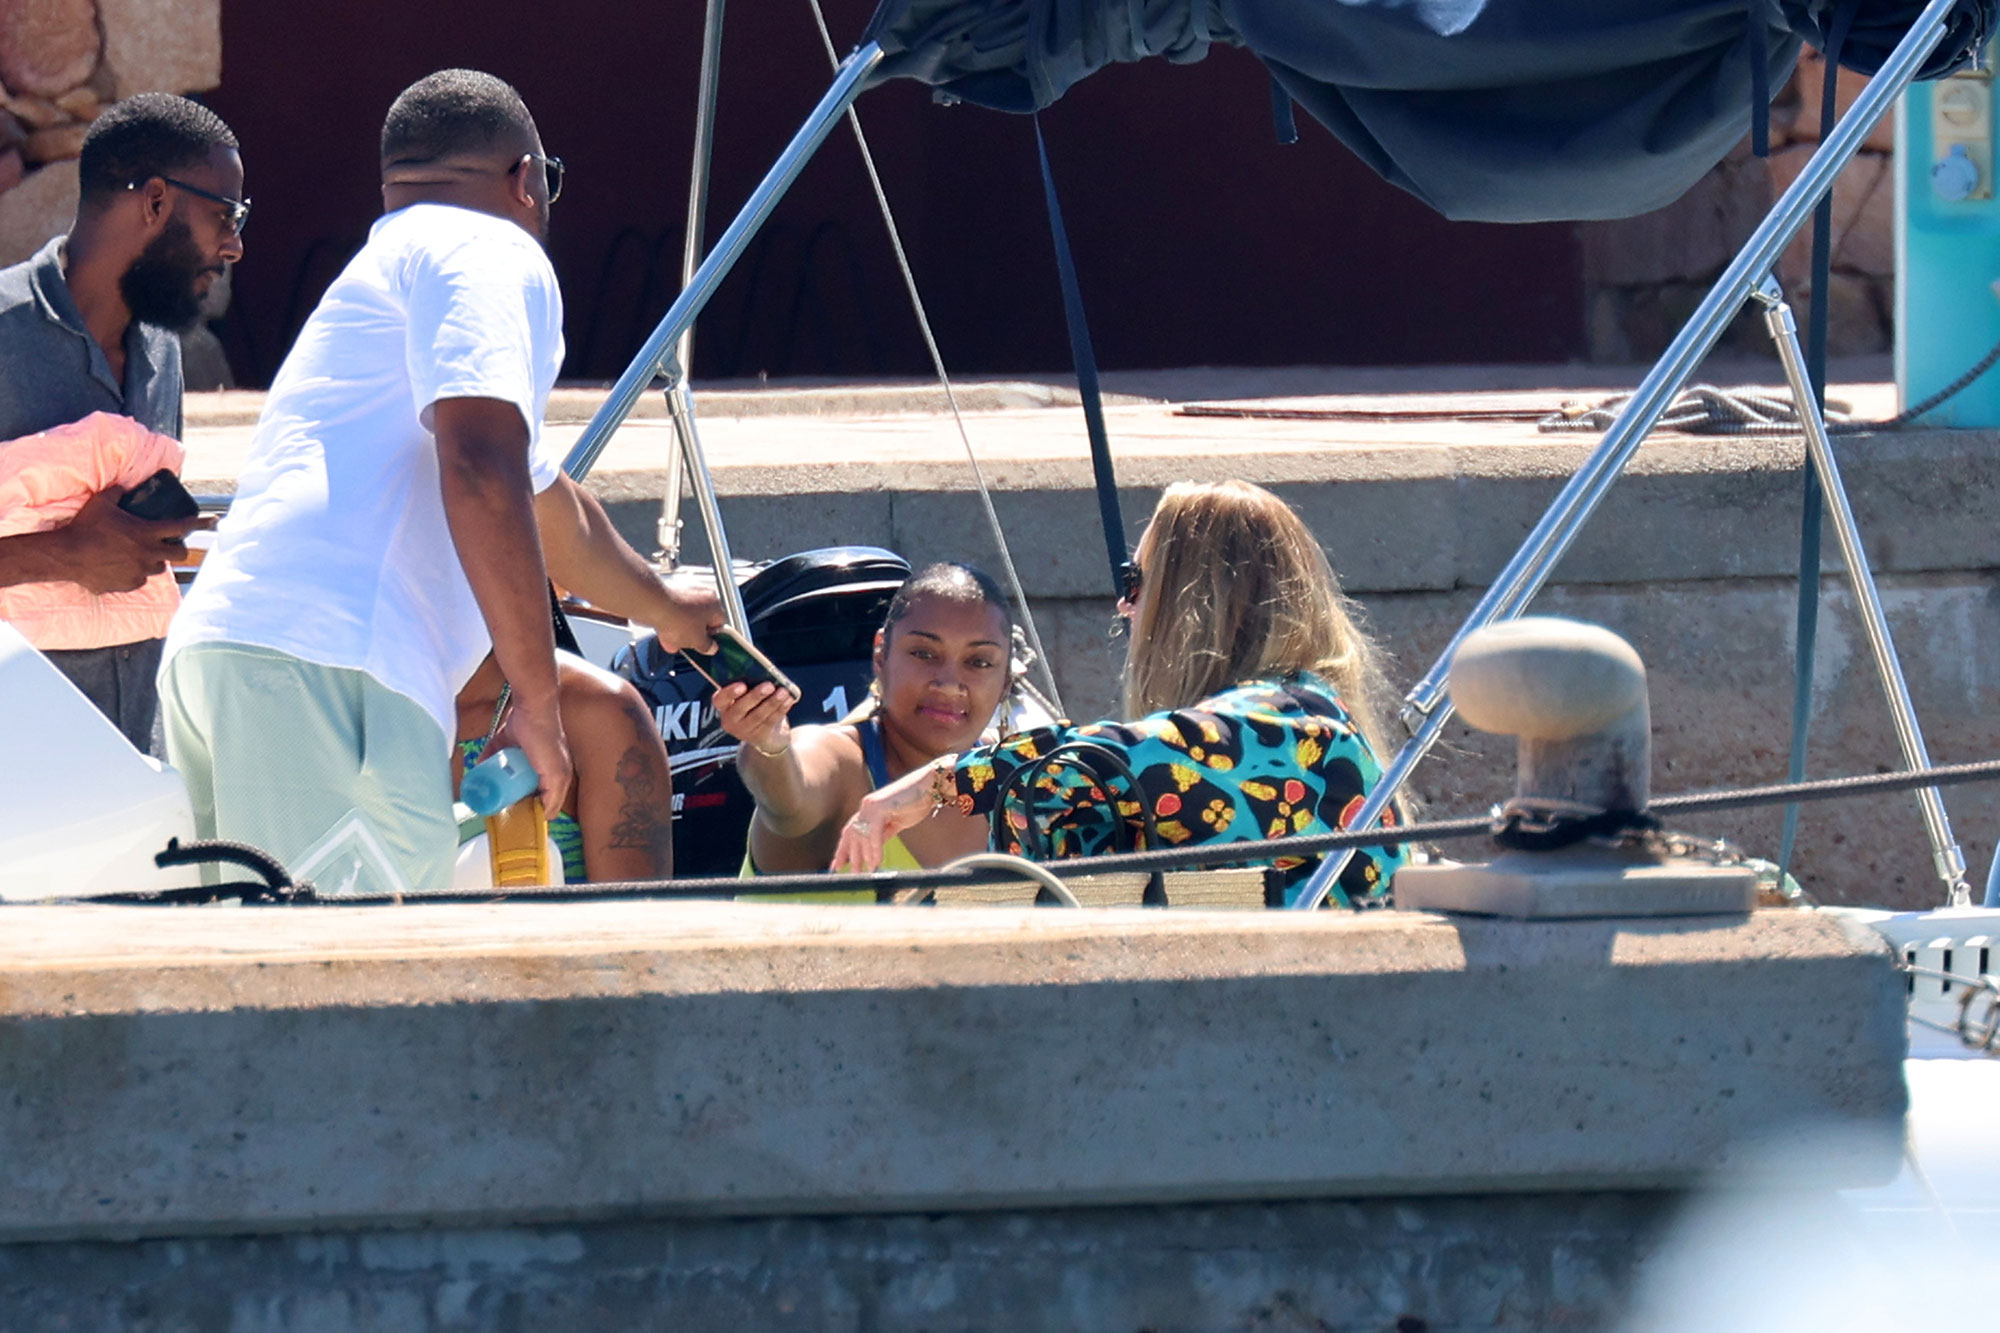 Adele and Rich Paul in Italy: Pictures